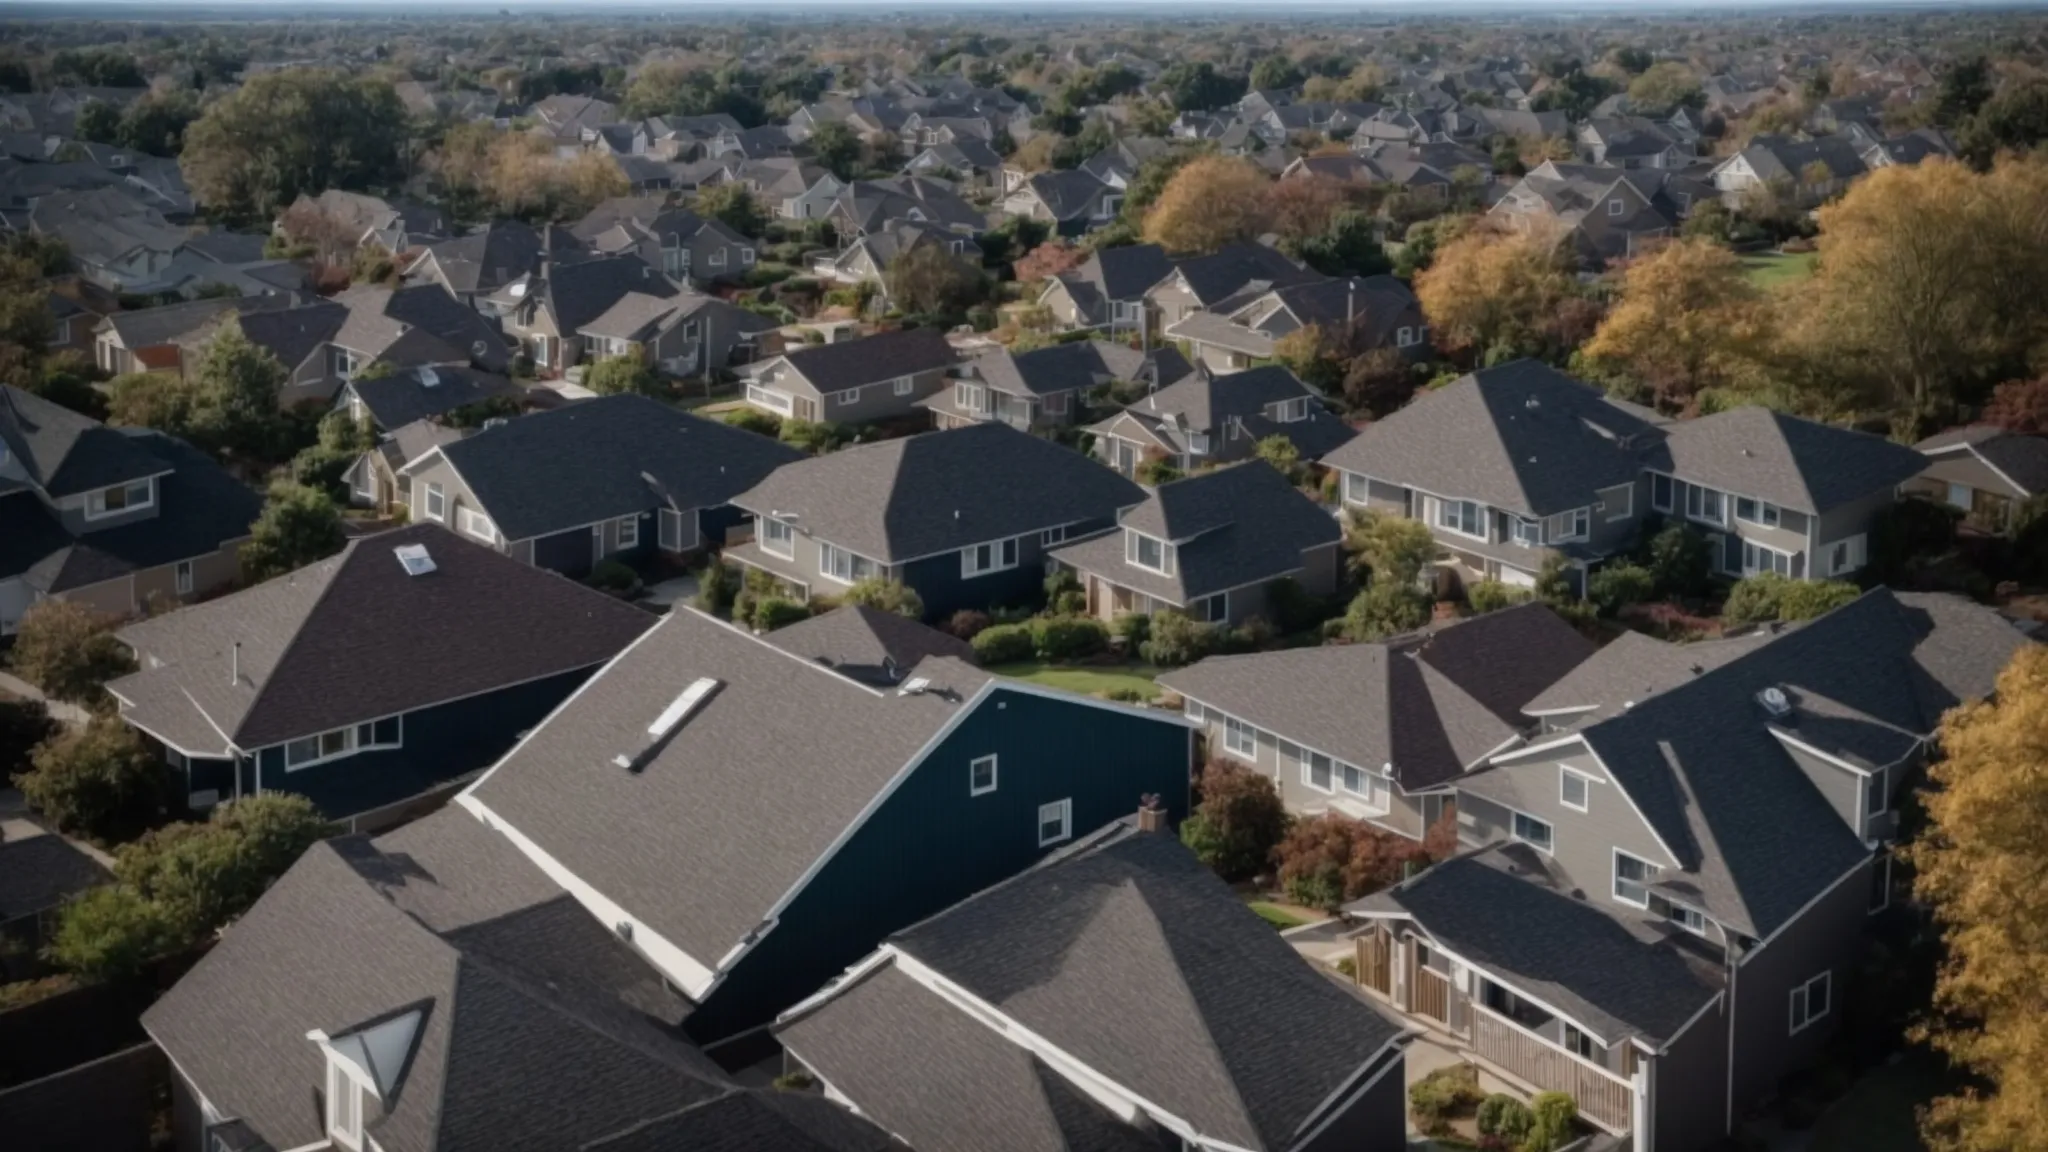 a wide vista showing a range of houses with new asphalt shingles, gleaming under the clear sky.